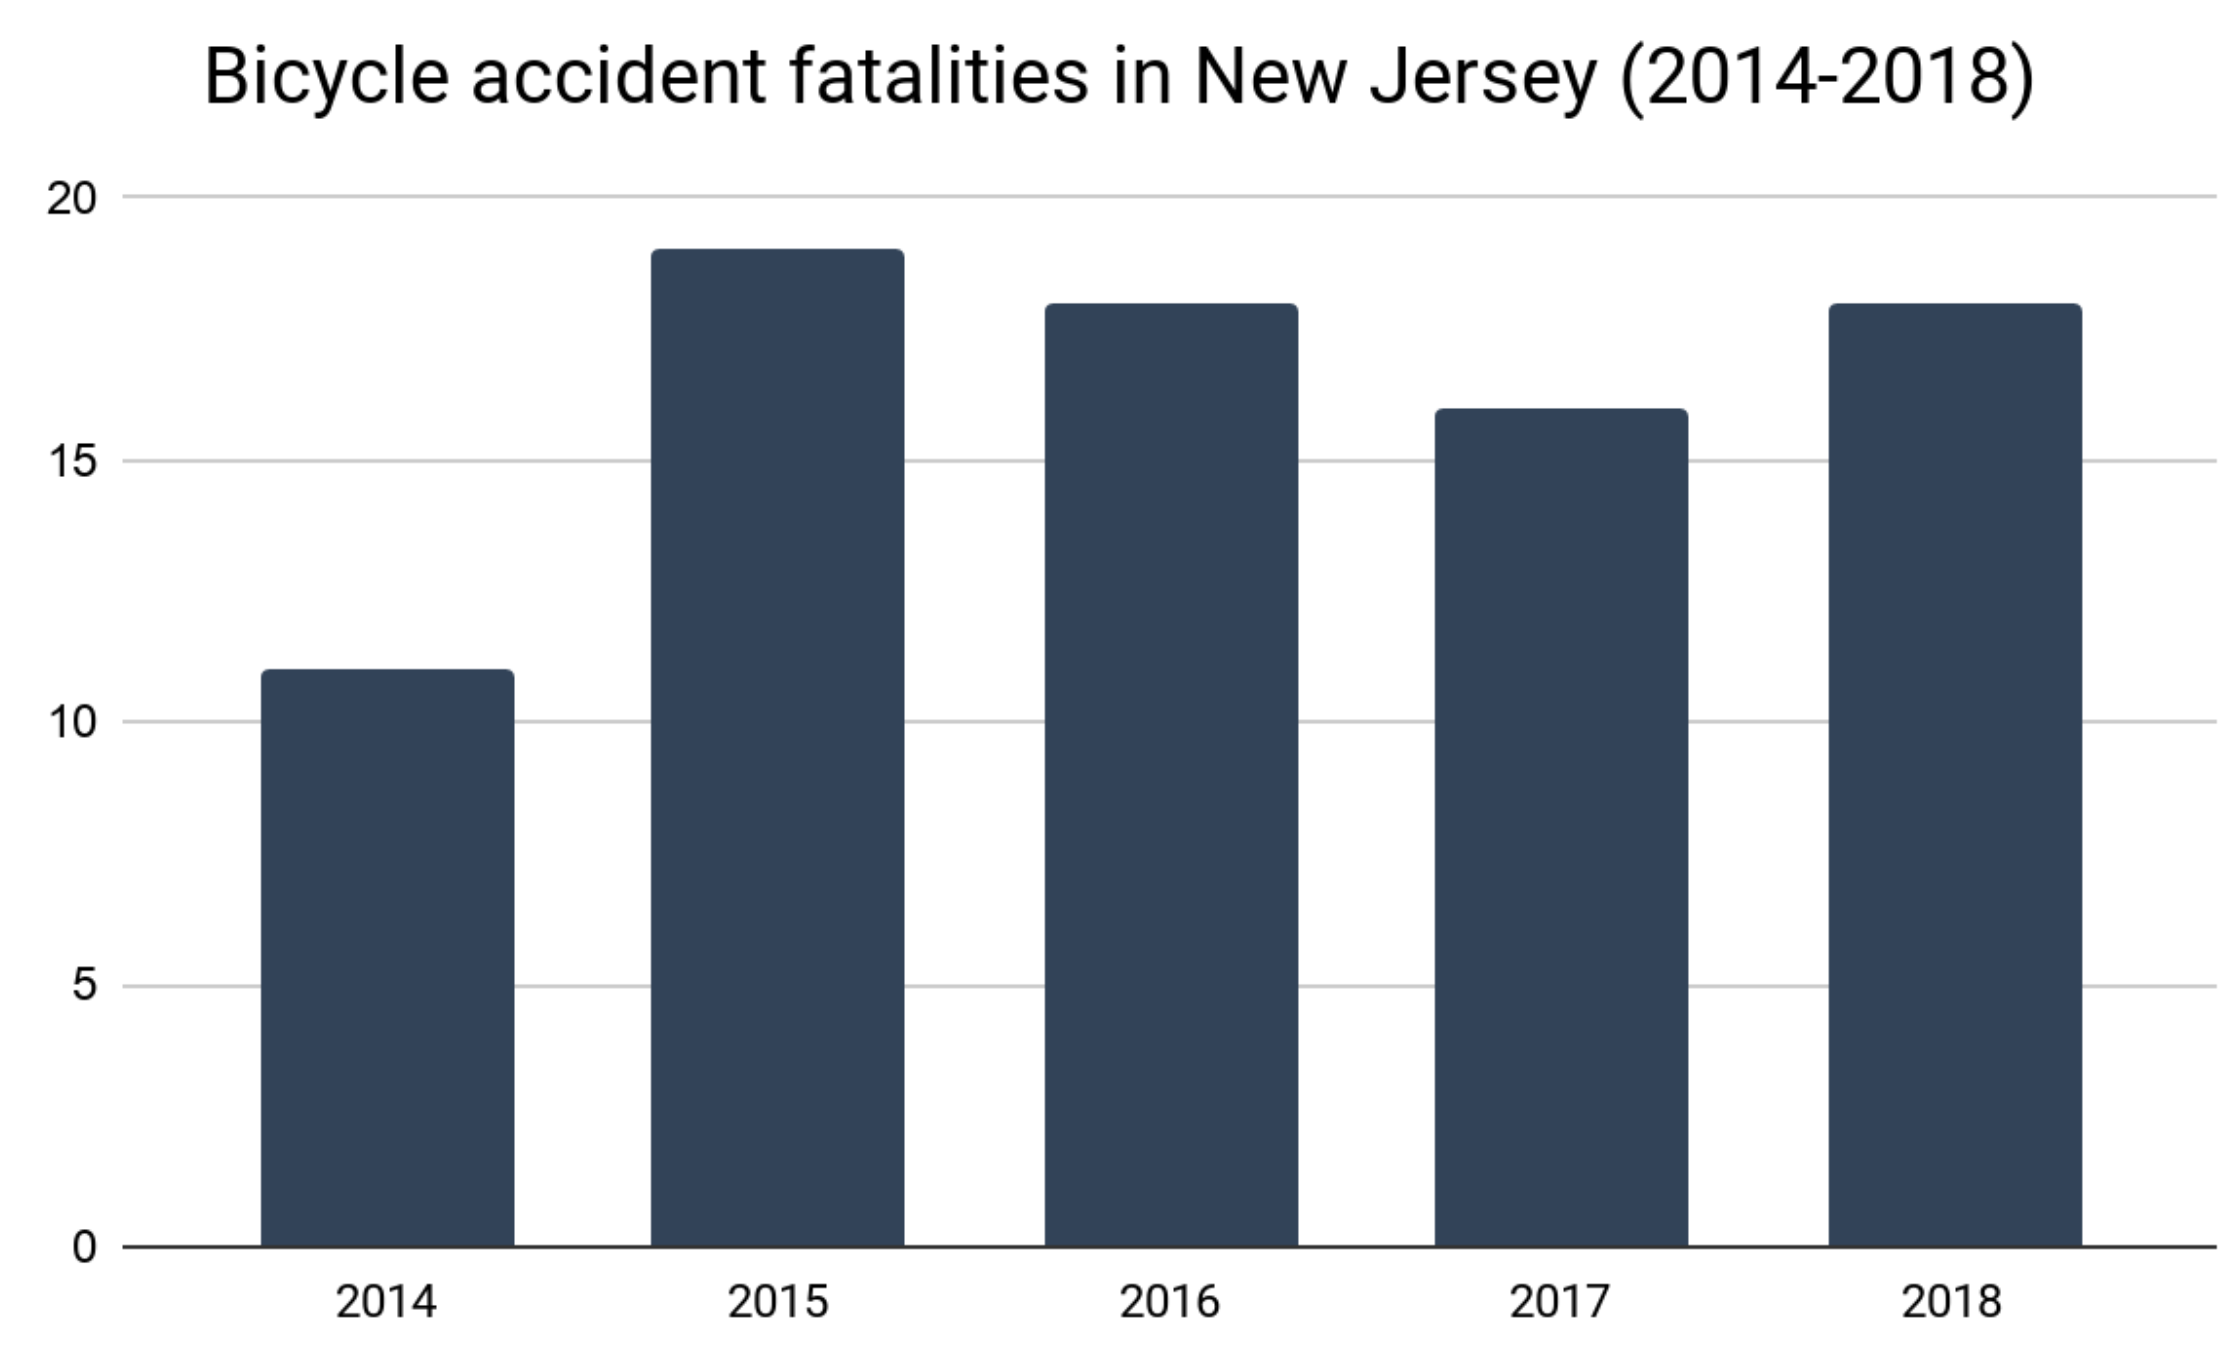 New Jersey bicycle accident fatalities